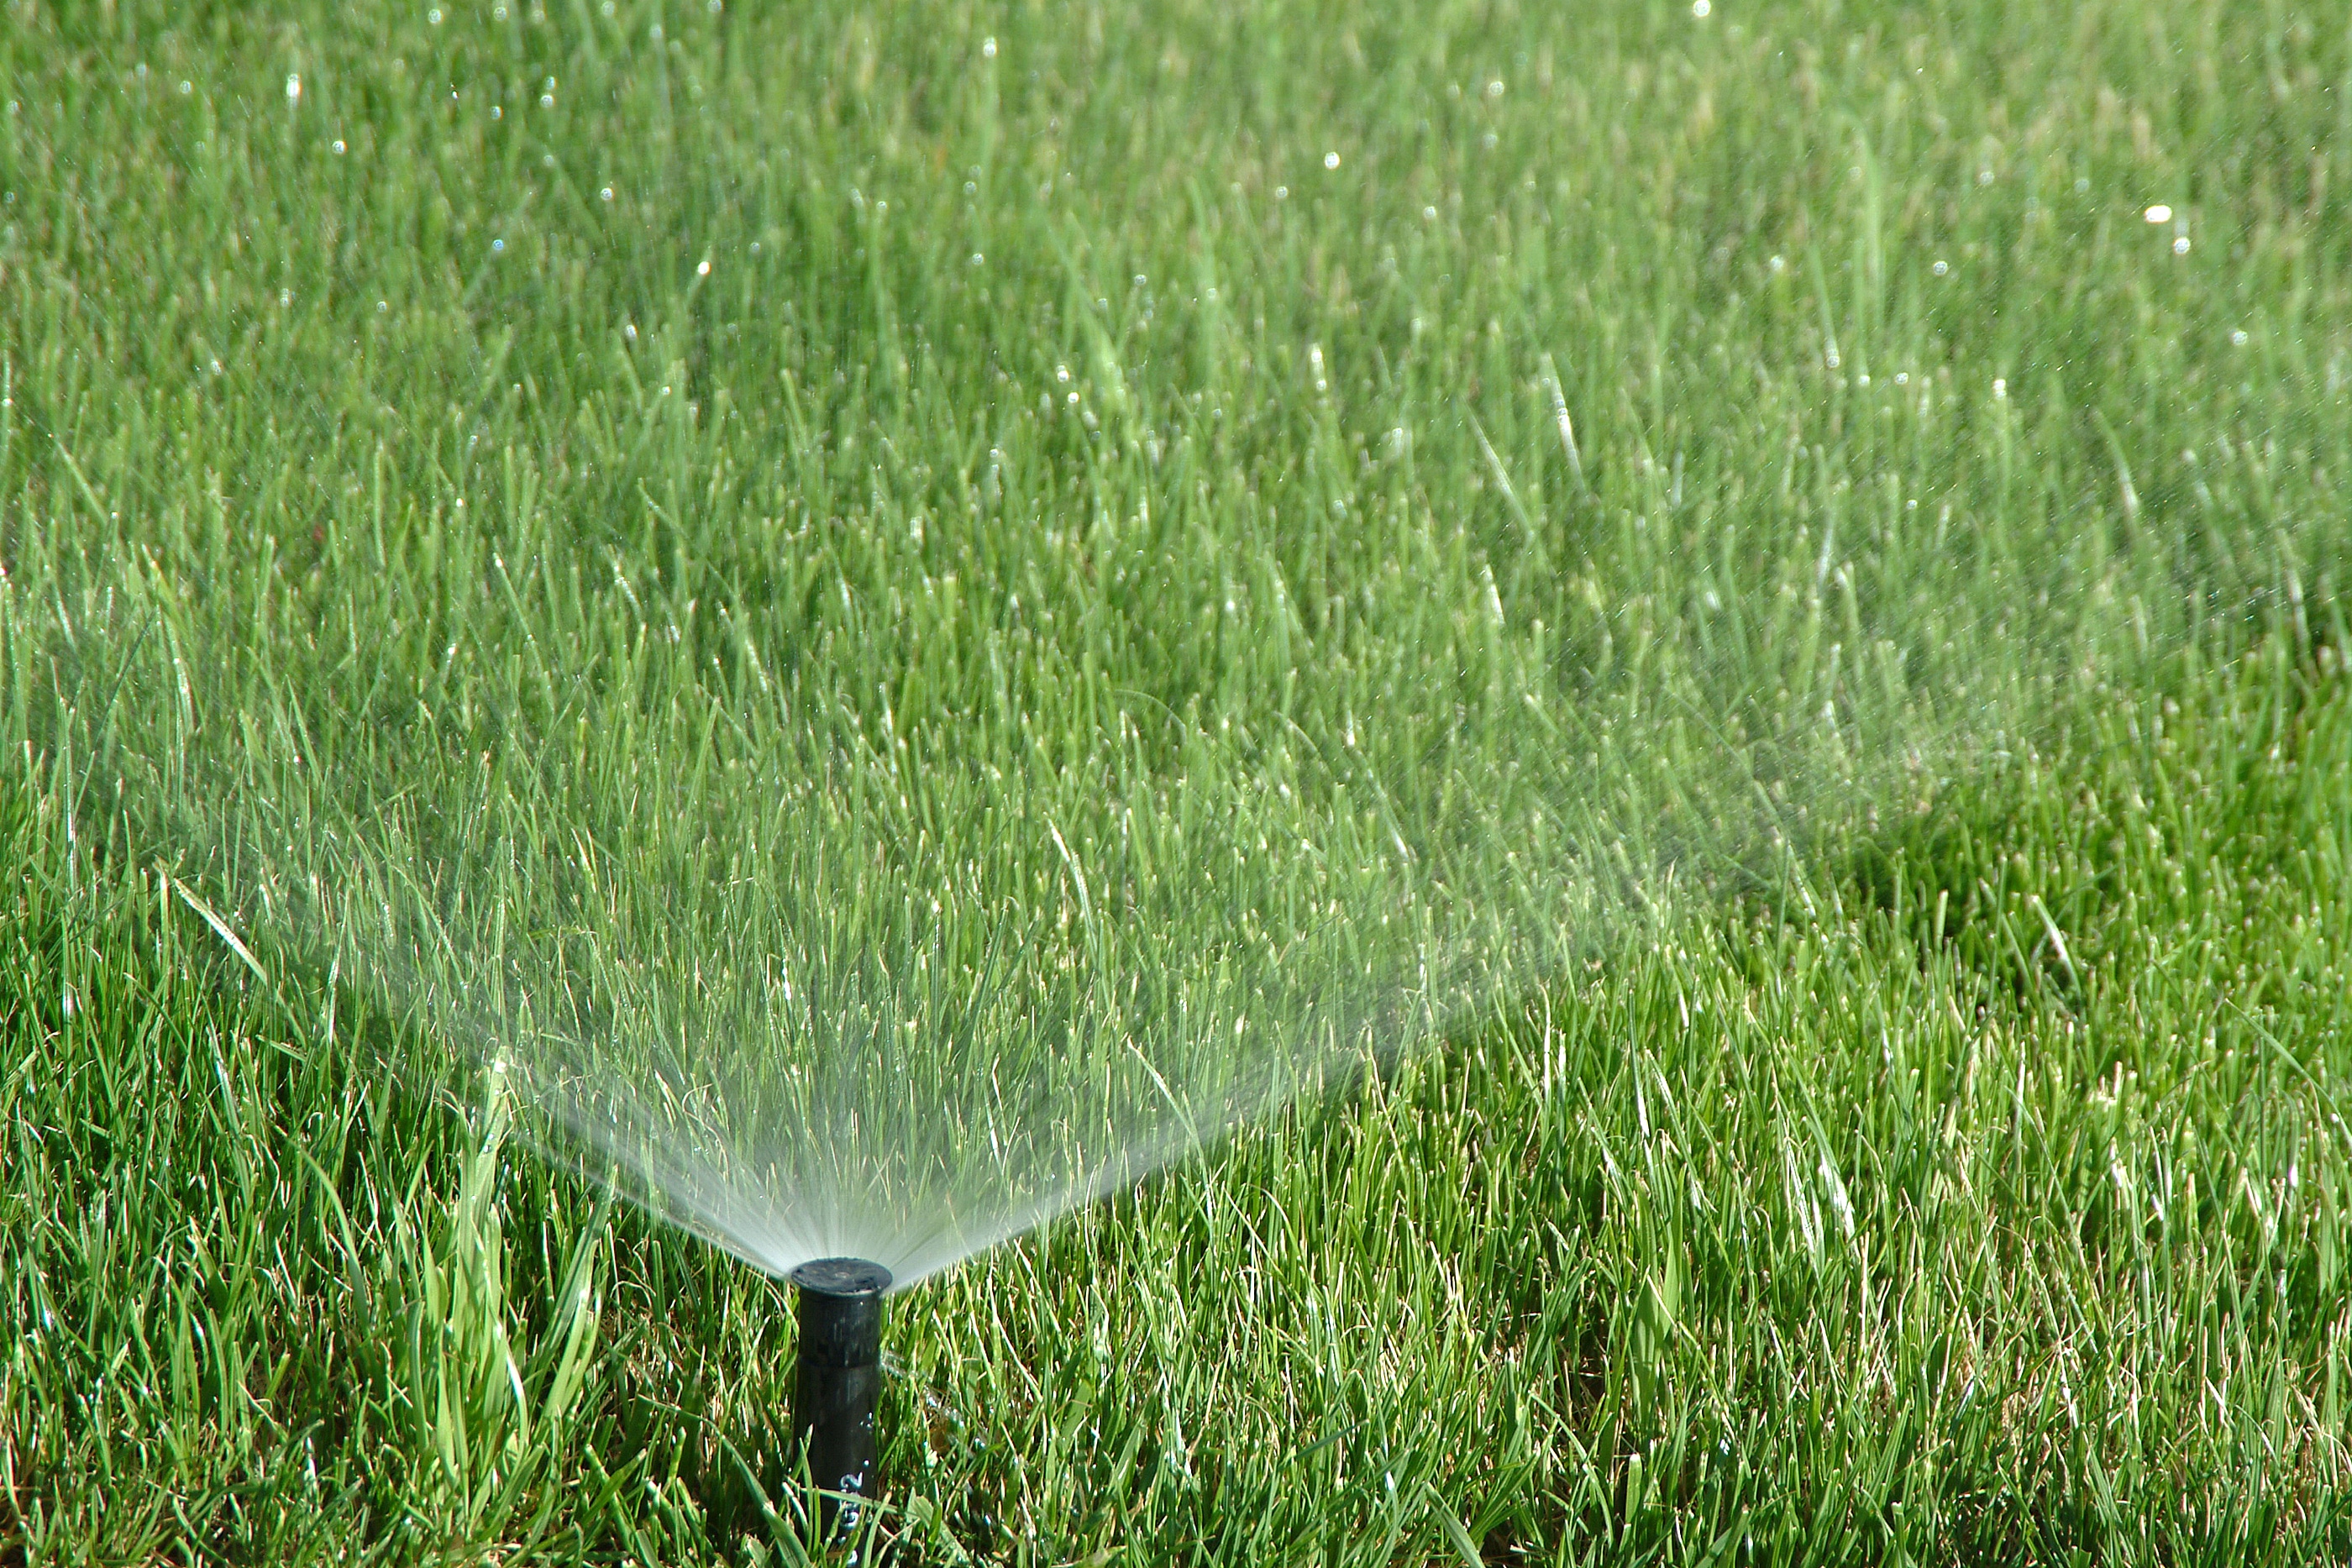 Troubleshooting Common Irrigation Issues